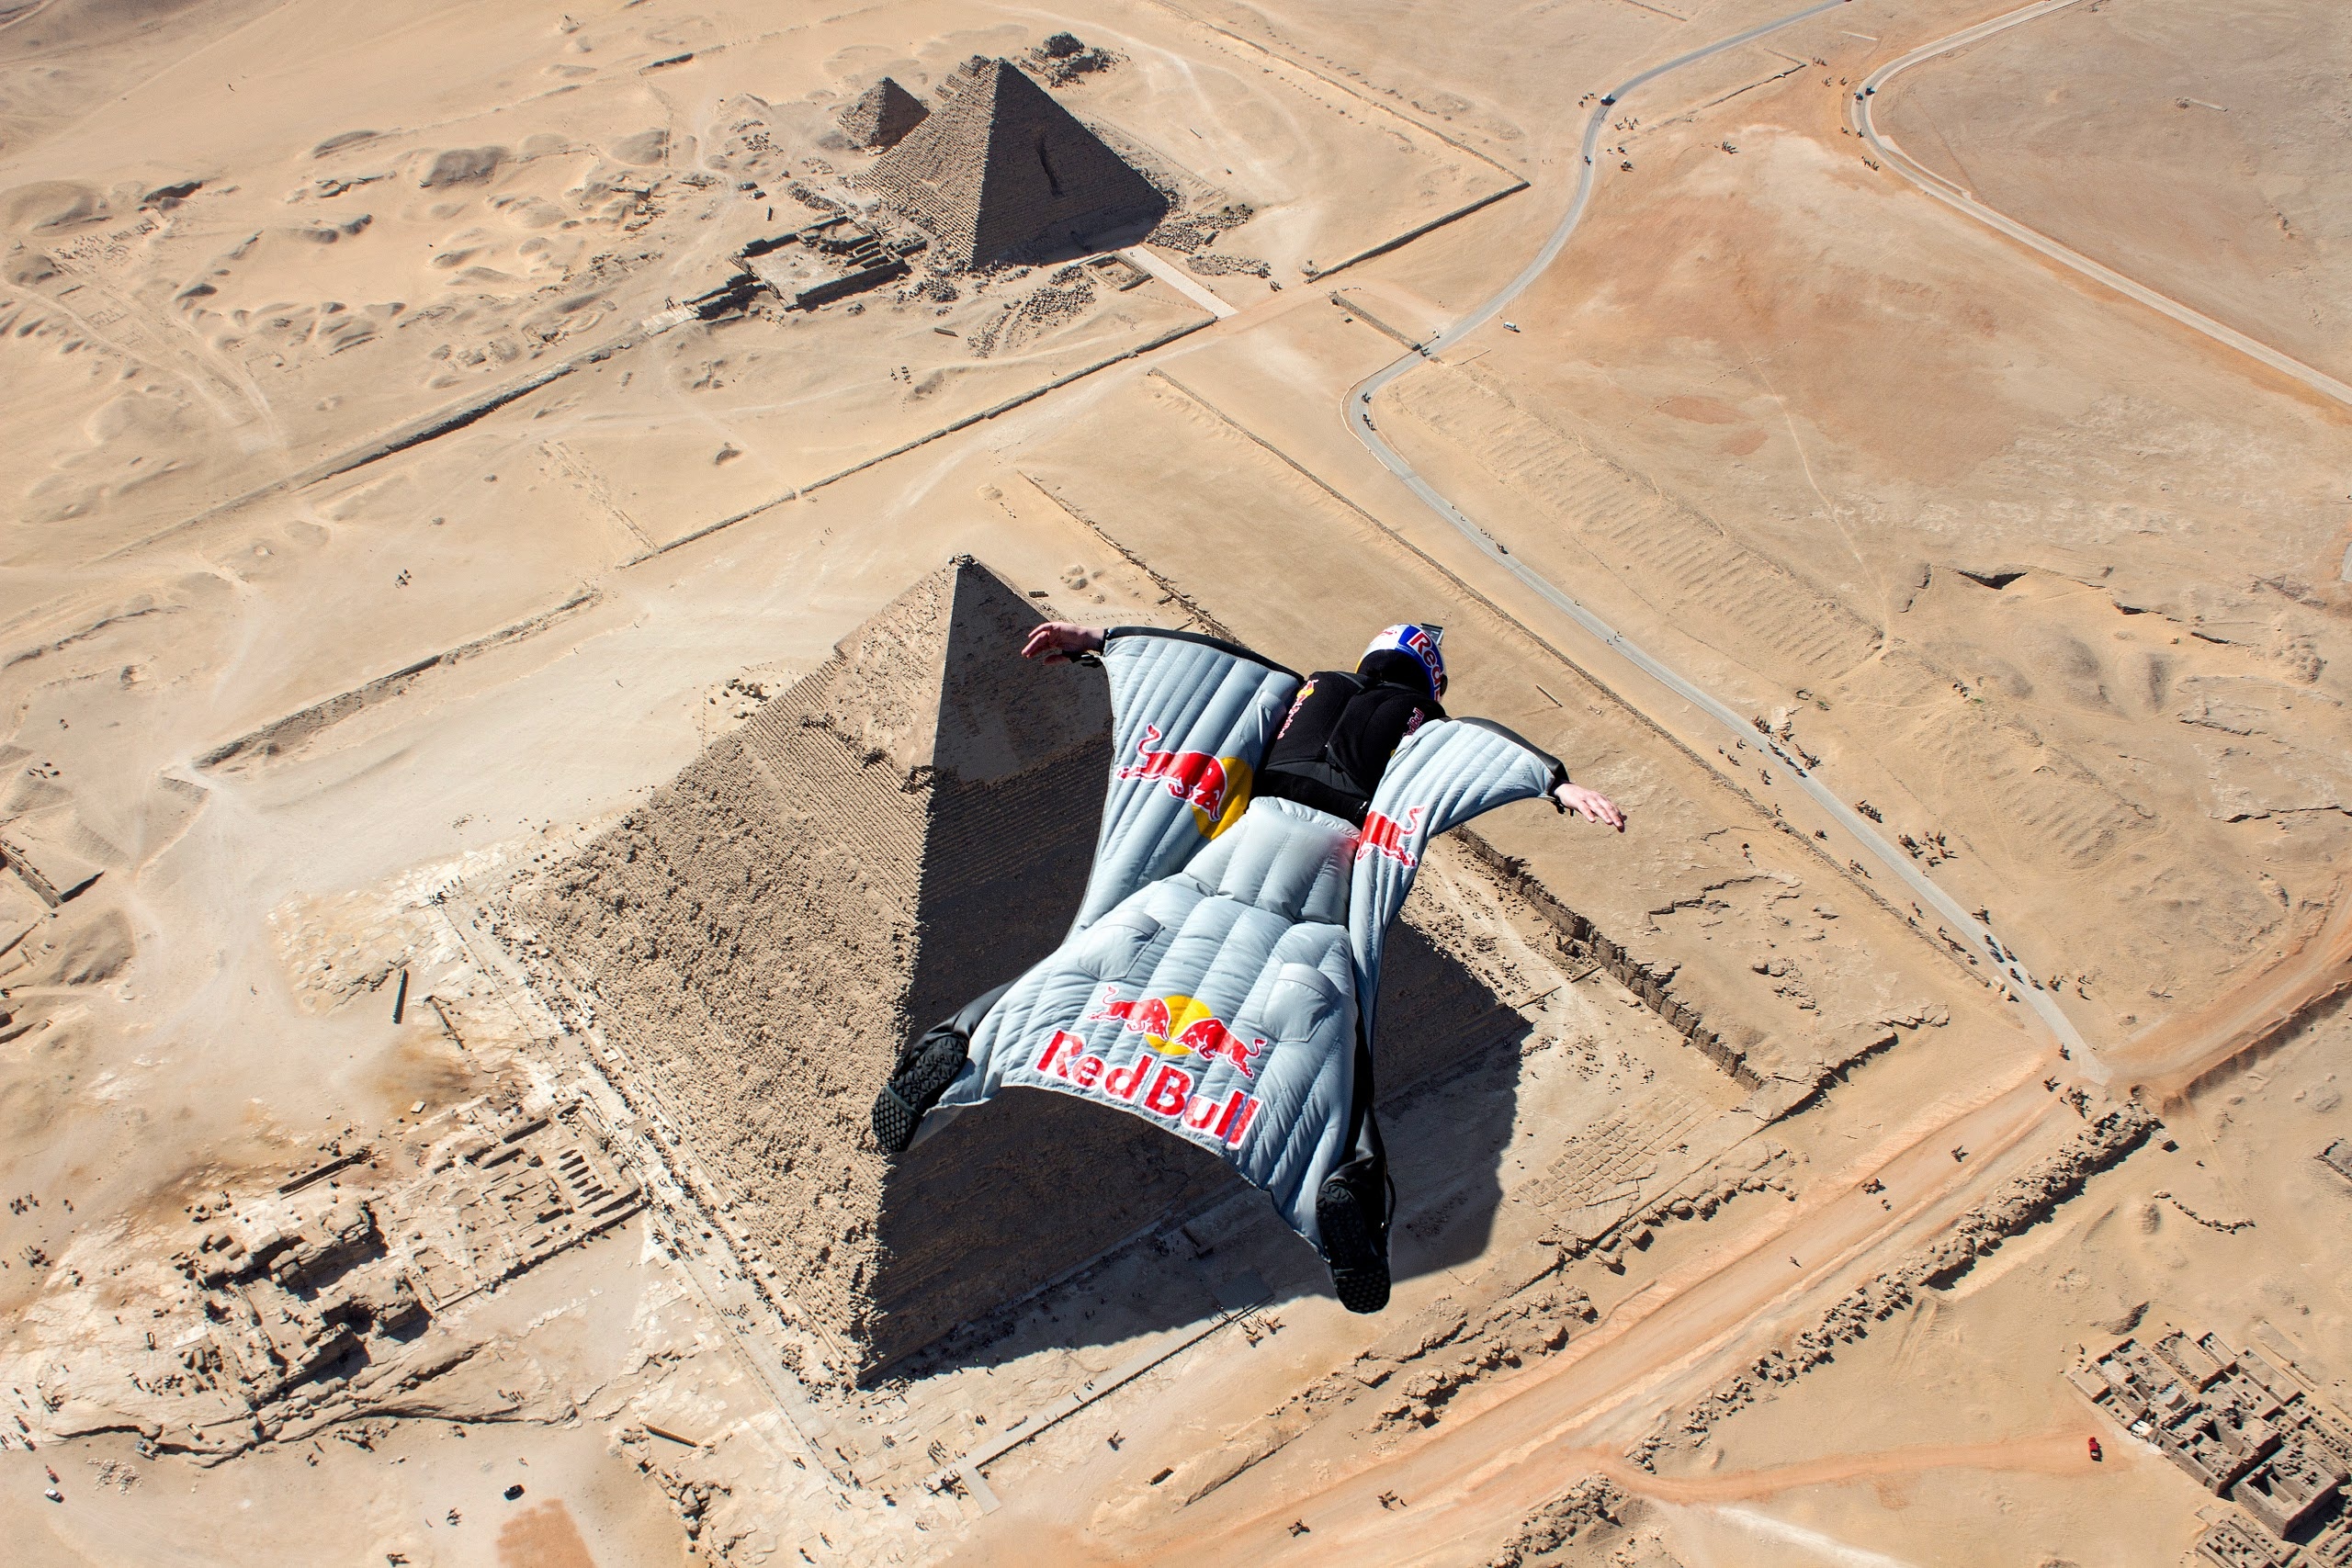 Wingsuit Flying: Wingsuiting in the desert, The Giza pyramid complex, Egypt. 2560x1710 HD Wallpaper.